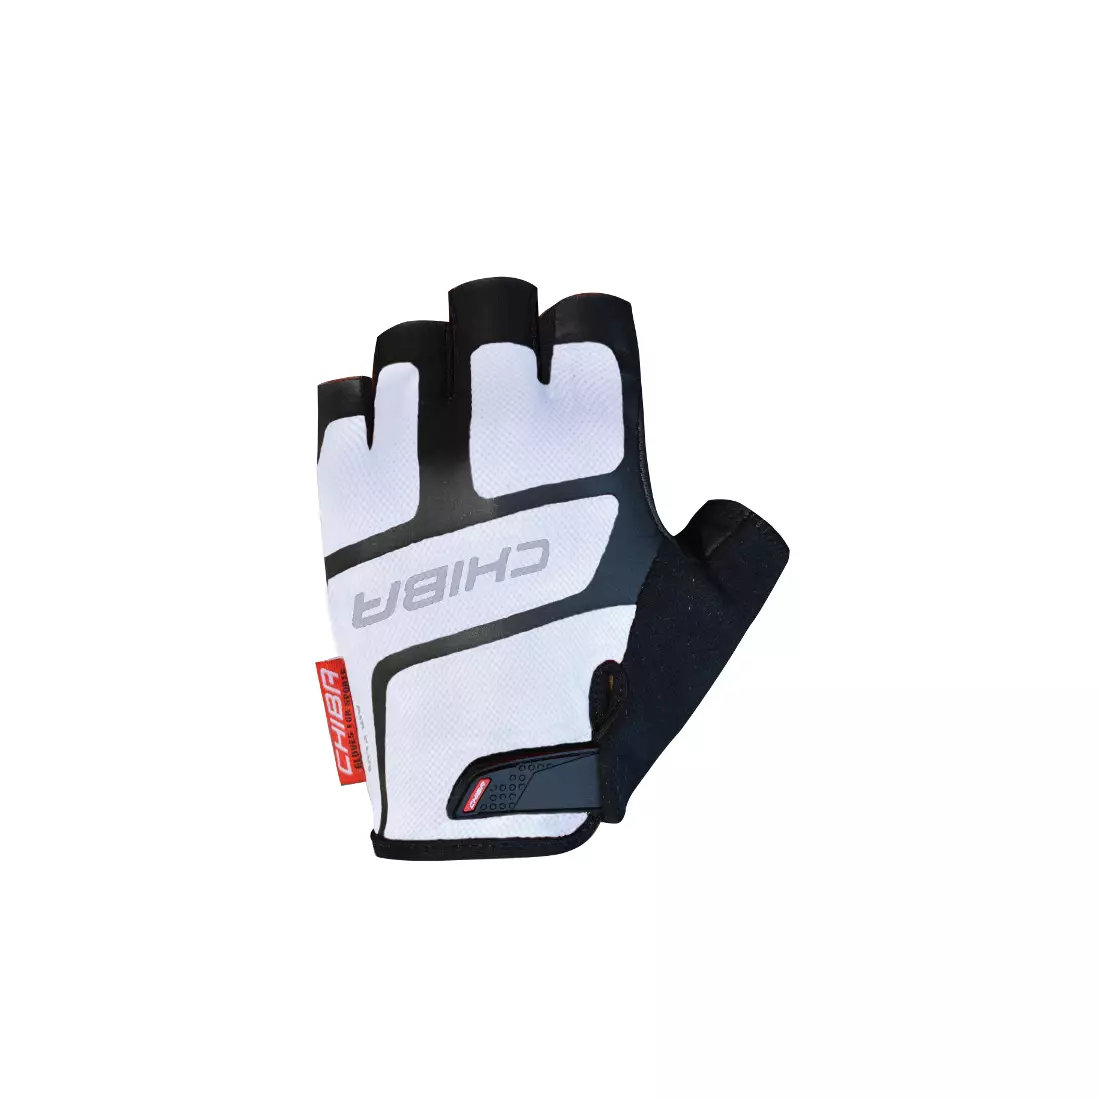 CHIBA PROFESSIONAL men's cycling gloves, white